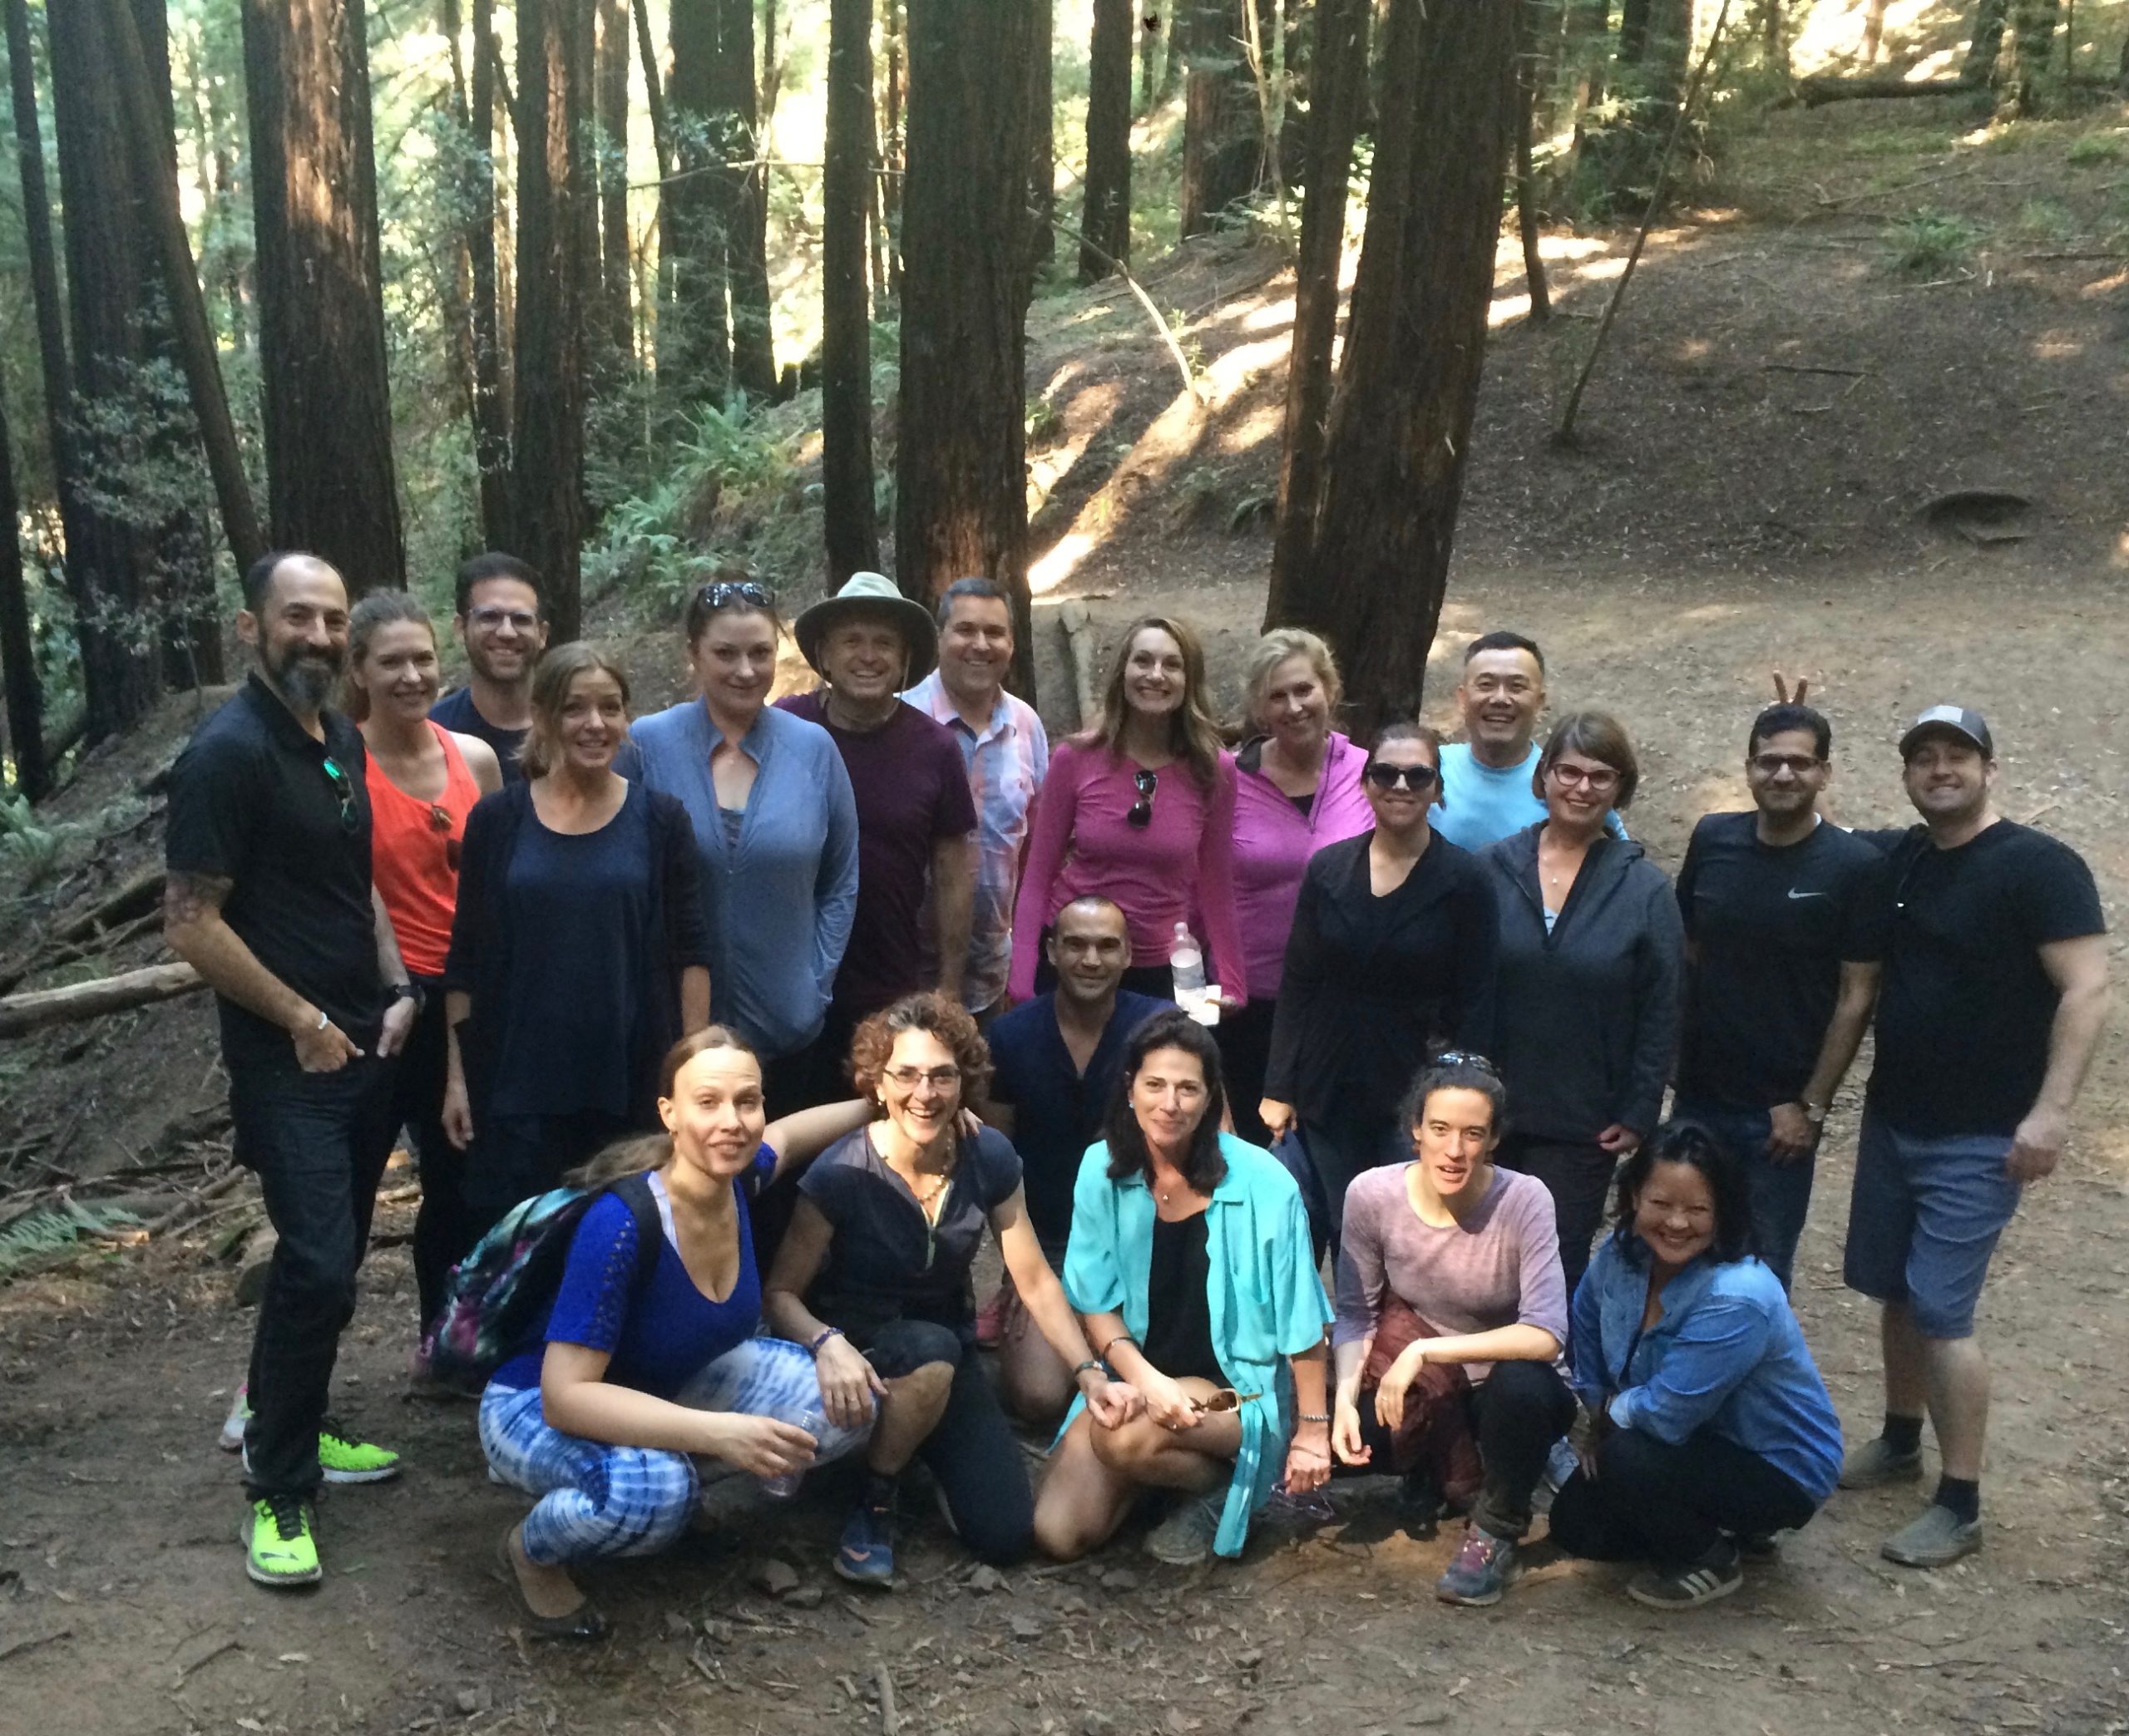 The Schonfield Consulting team cruiches in front of Well Being Trust staffers on a dirt road in a forest